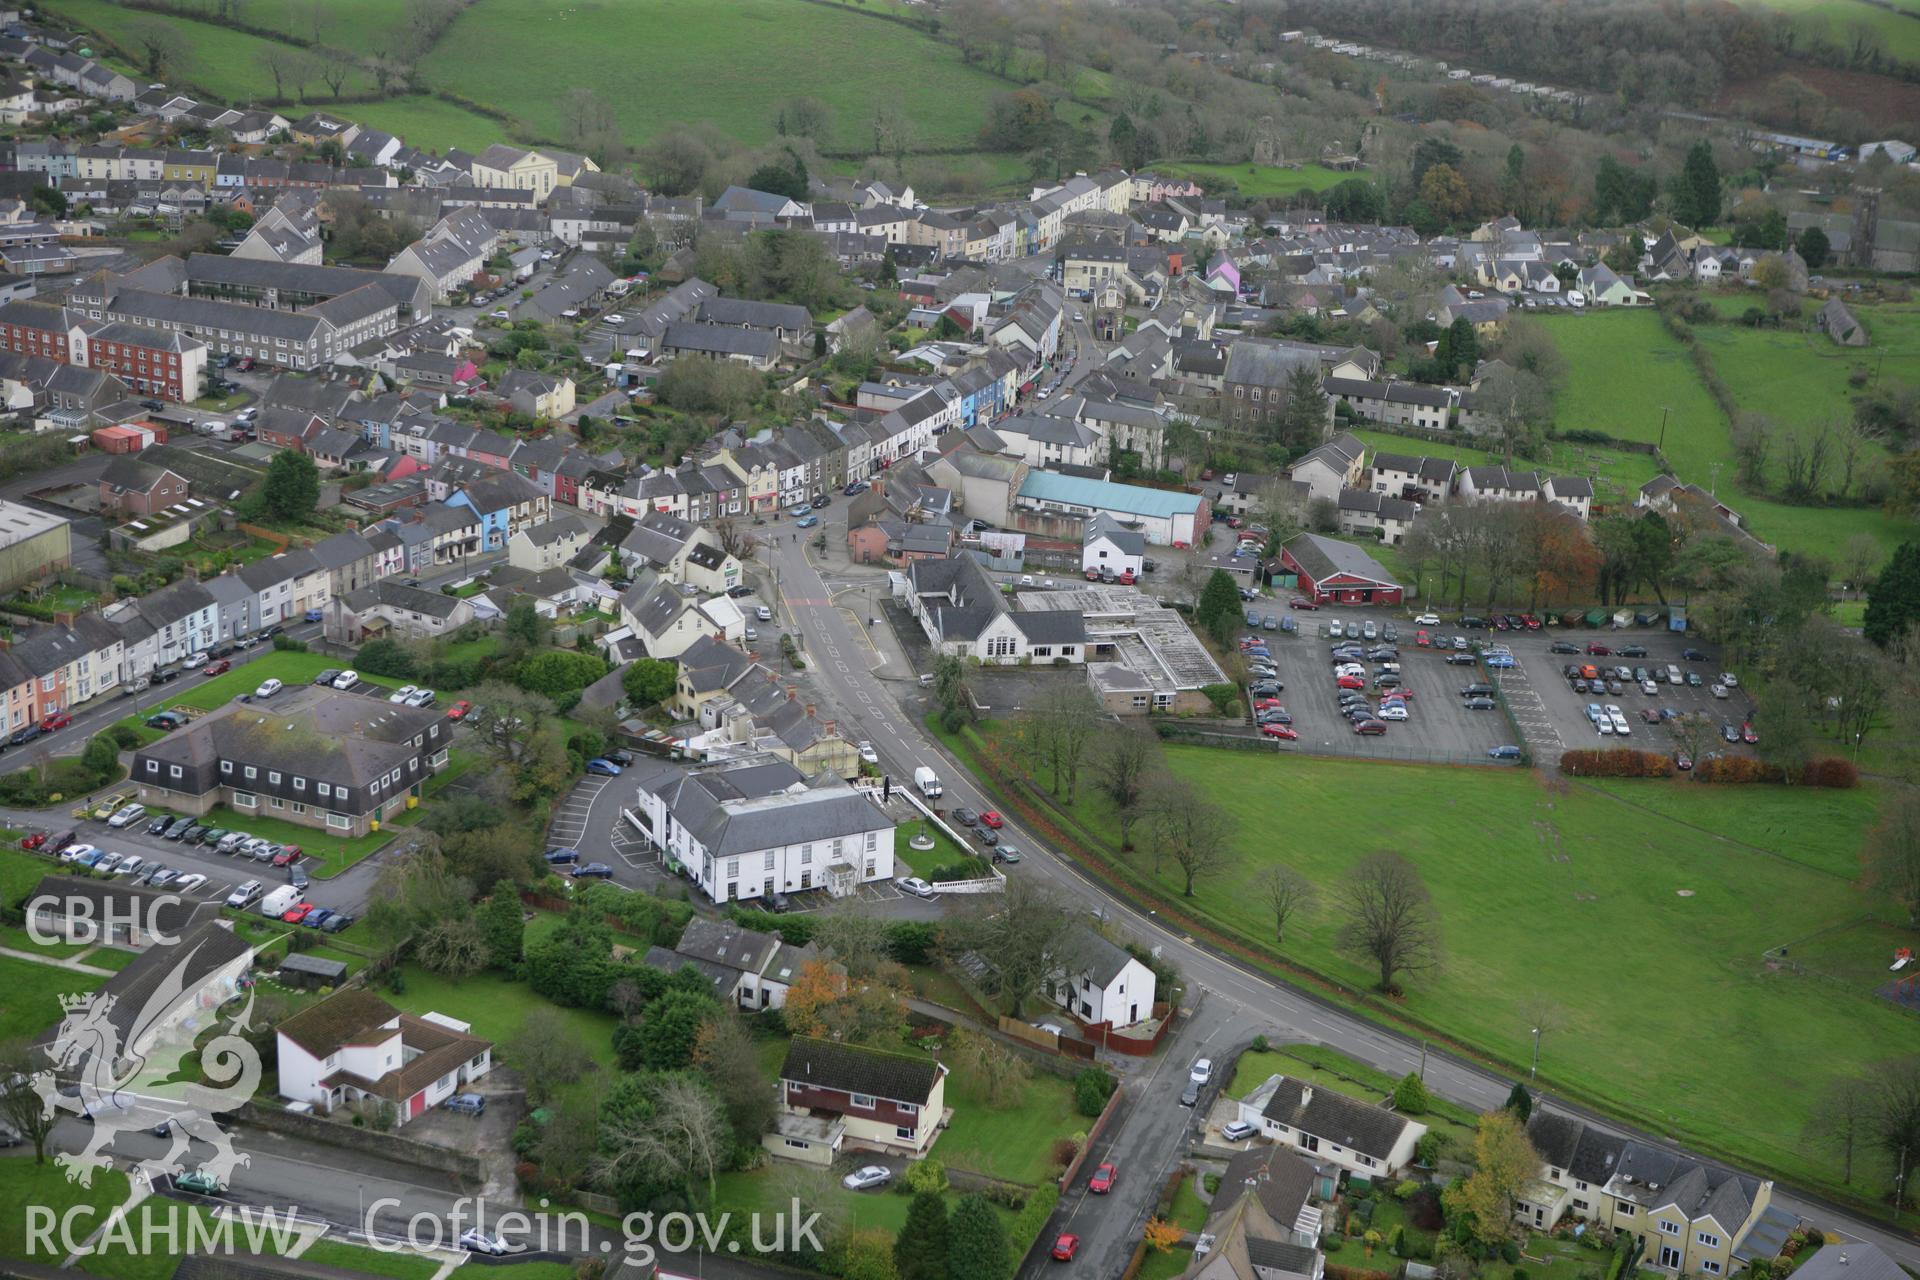 RCAHMW colour oblique photograph of Narberth, from the north-west. Taken by Toby Driver on 17/11/2011.